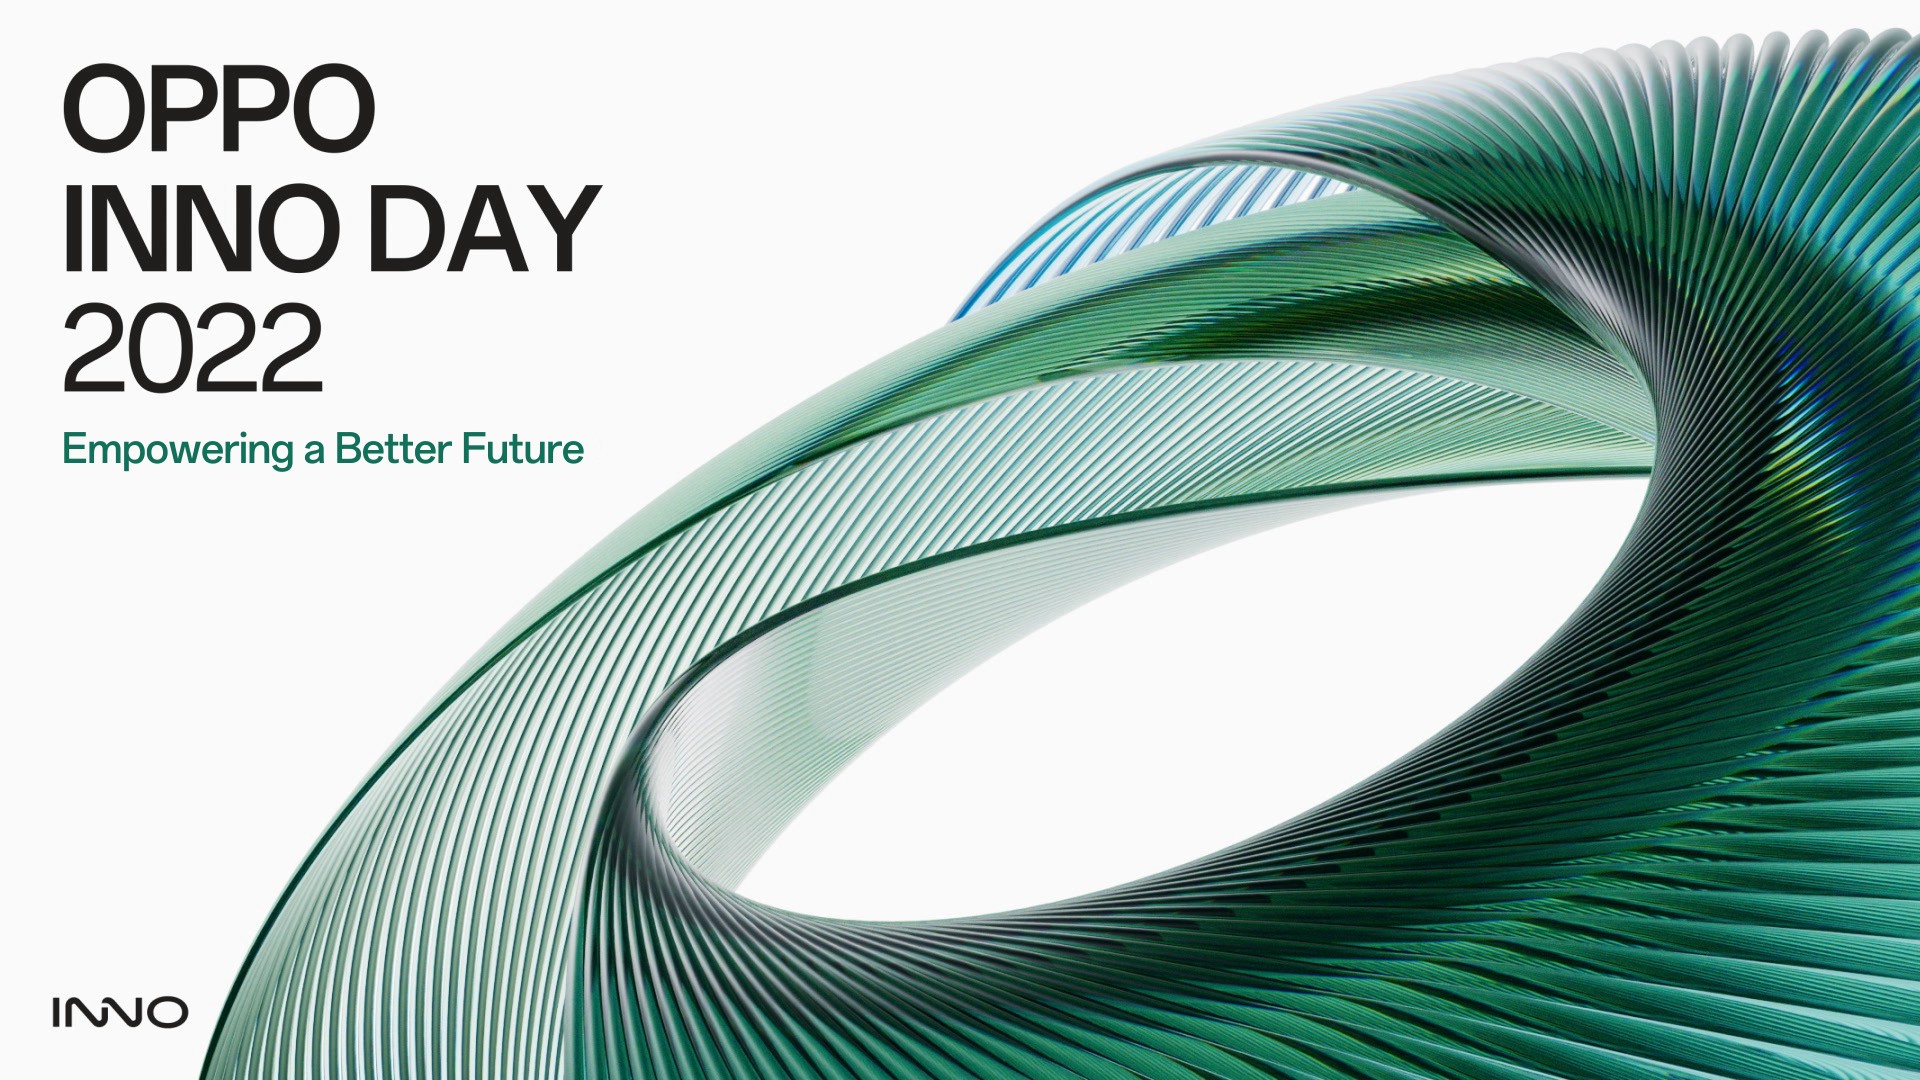 New Technologies and Virtuous Innovation at OPPO INNO DAY 2022 featured image